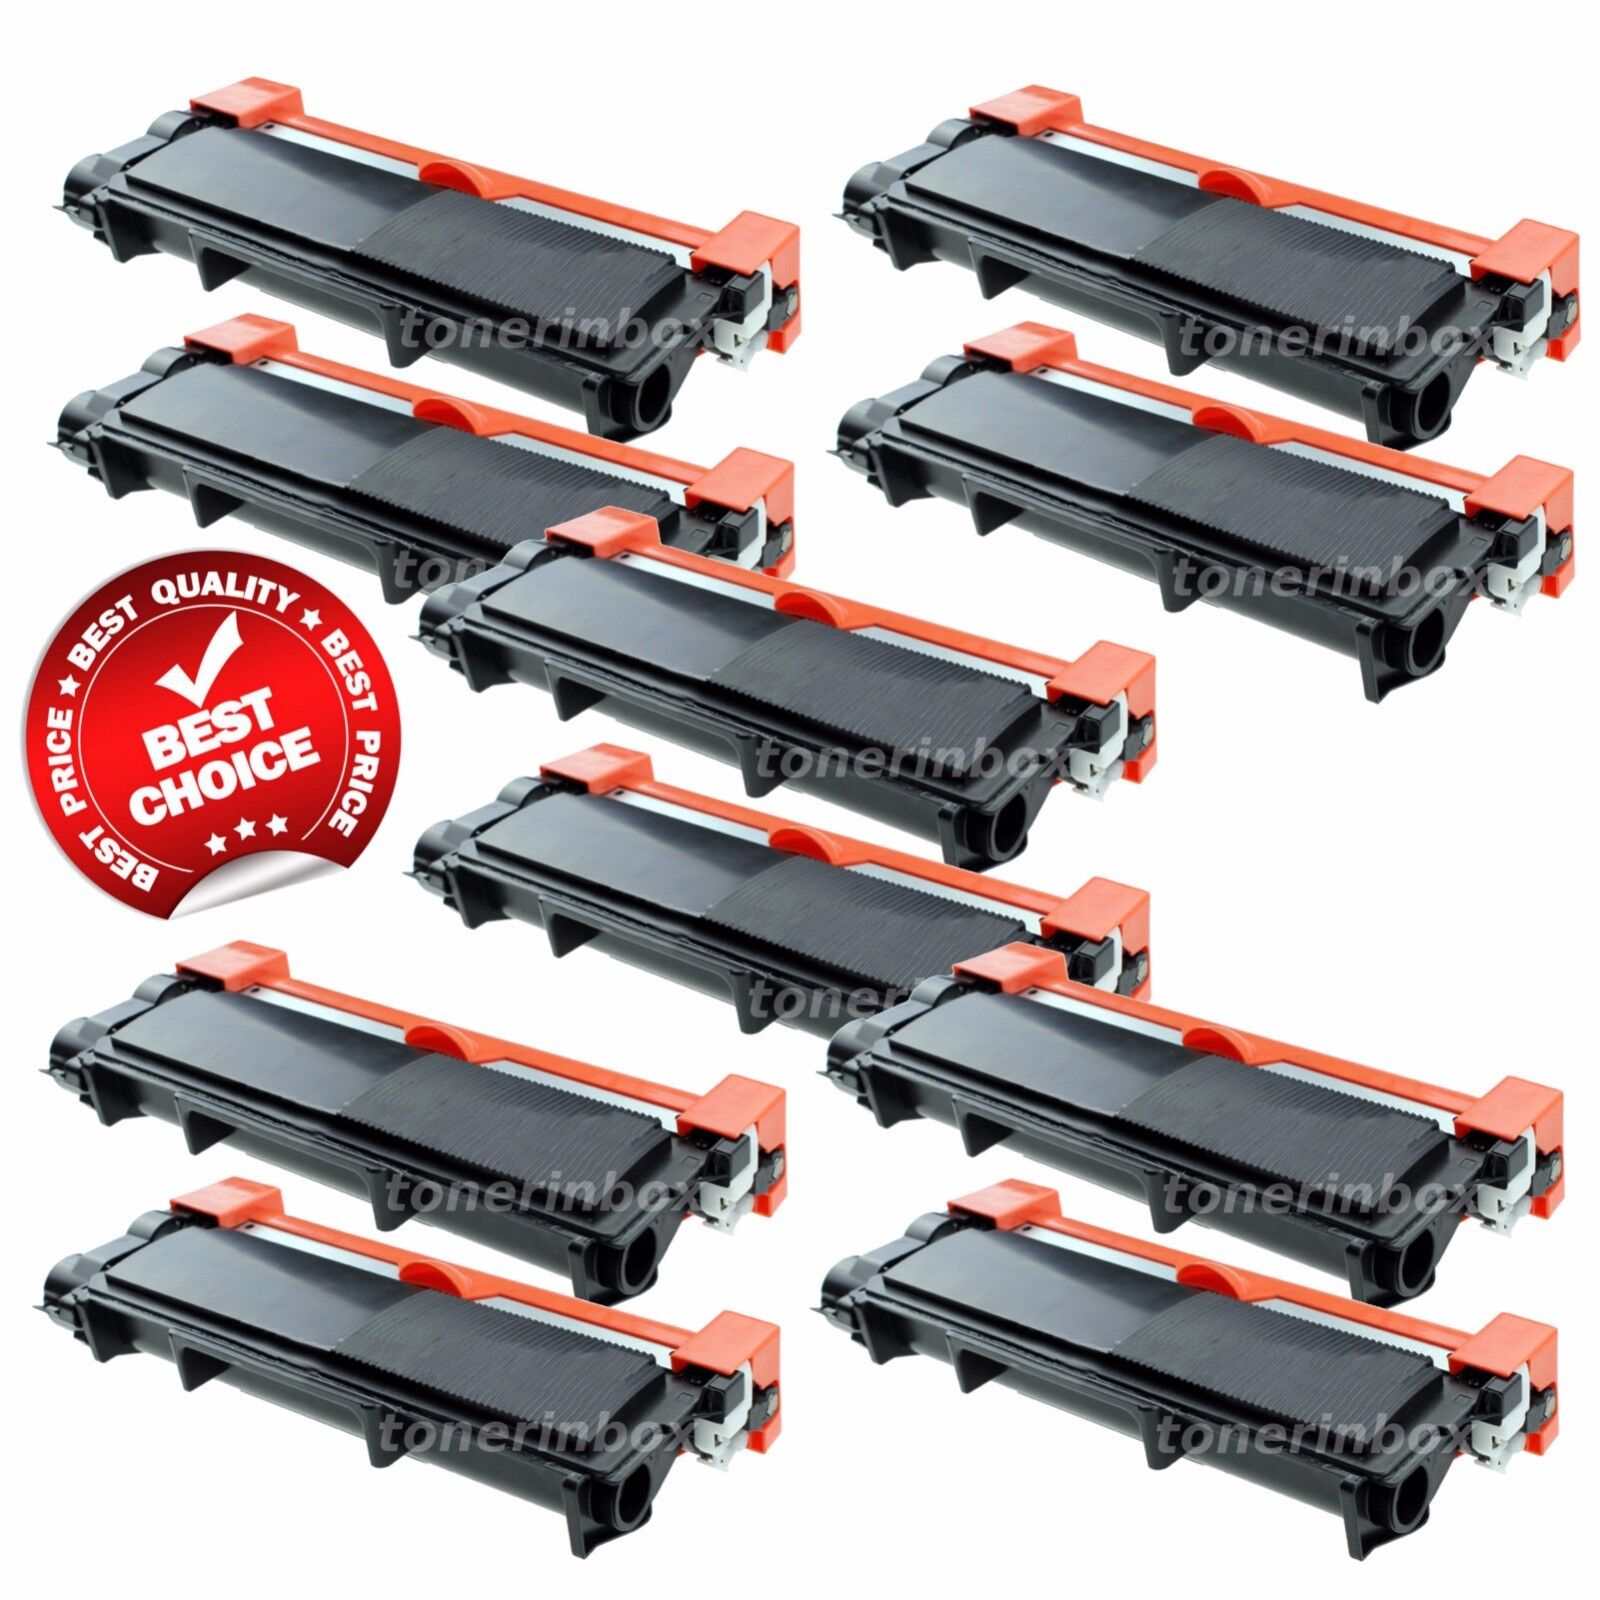 10 PK High-Yield TN660 Toner Compatible TN630 For Brother DCP-L2540DW Lots Black